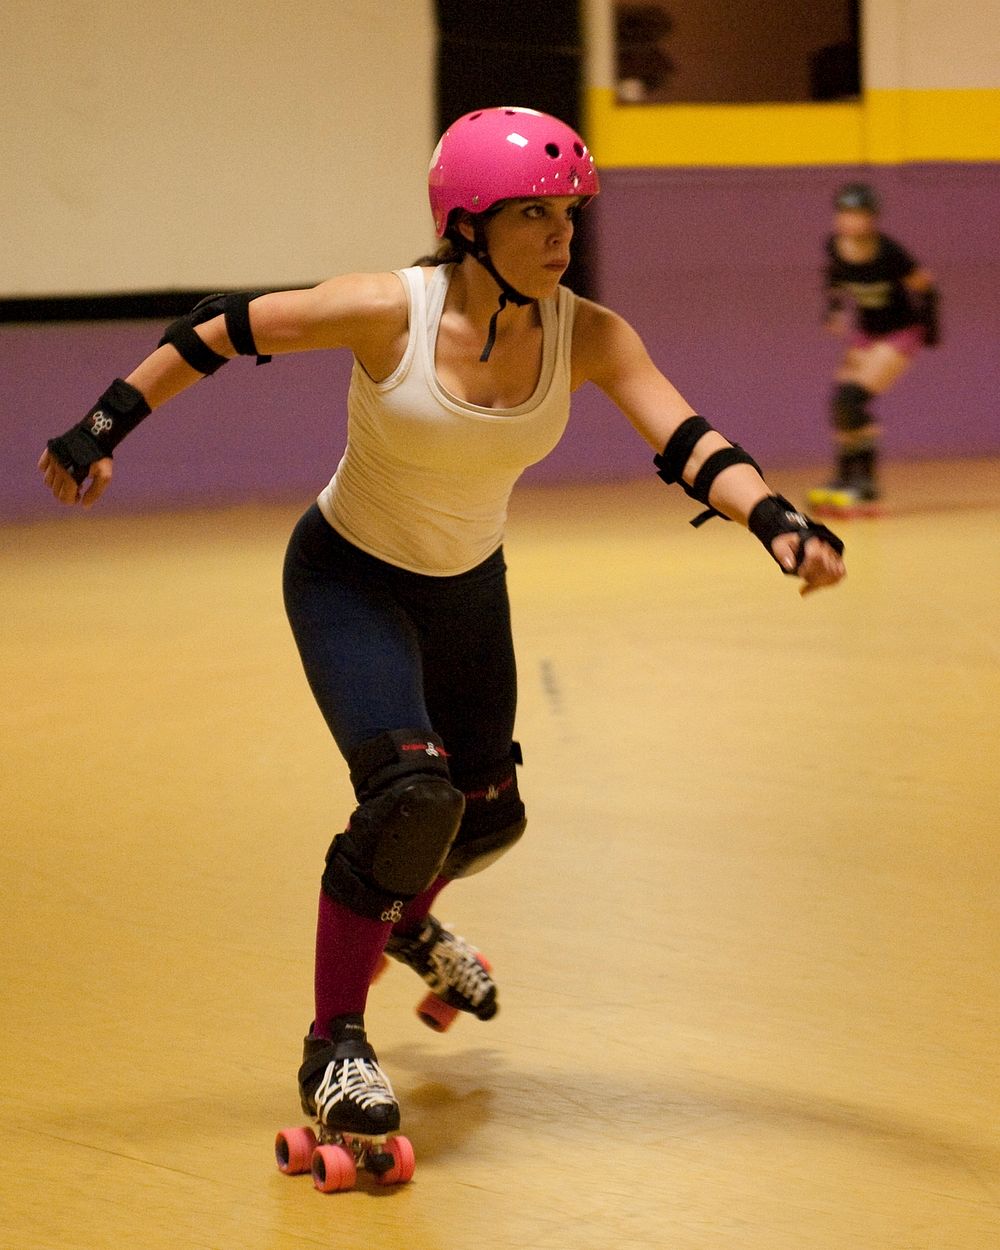 Petty Officer 3rd Class Destinee Winslow skates Sunday, May 1, 2011, during a roller derby practice in Groton, Conn. Winslow…